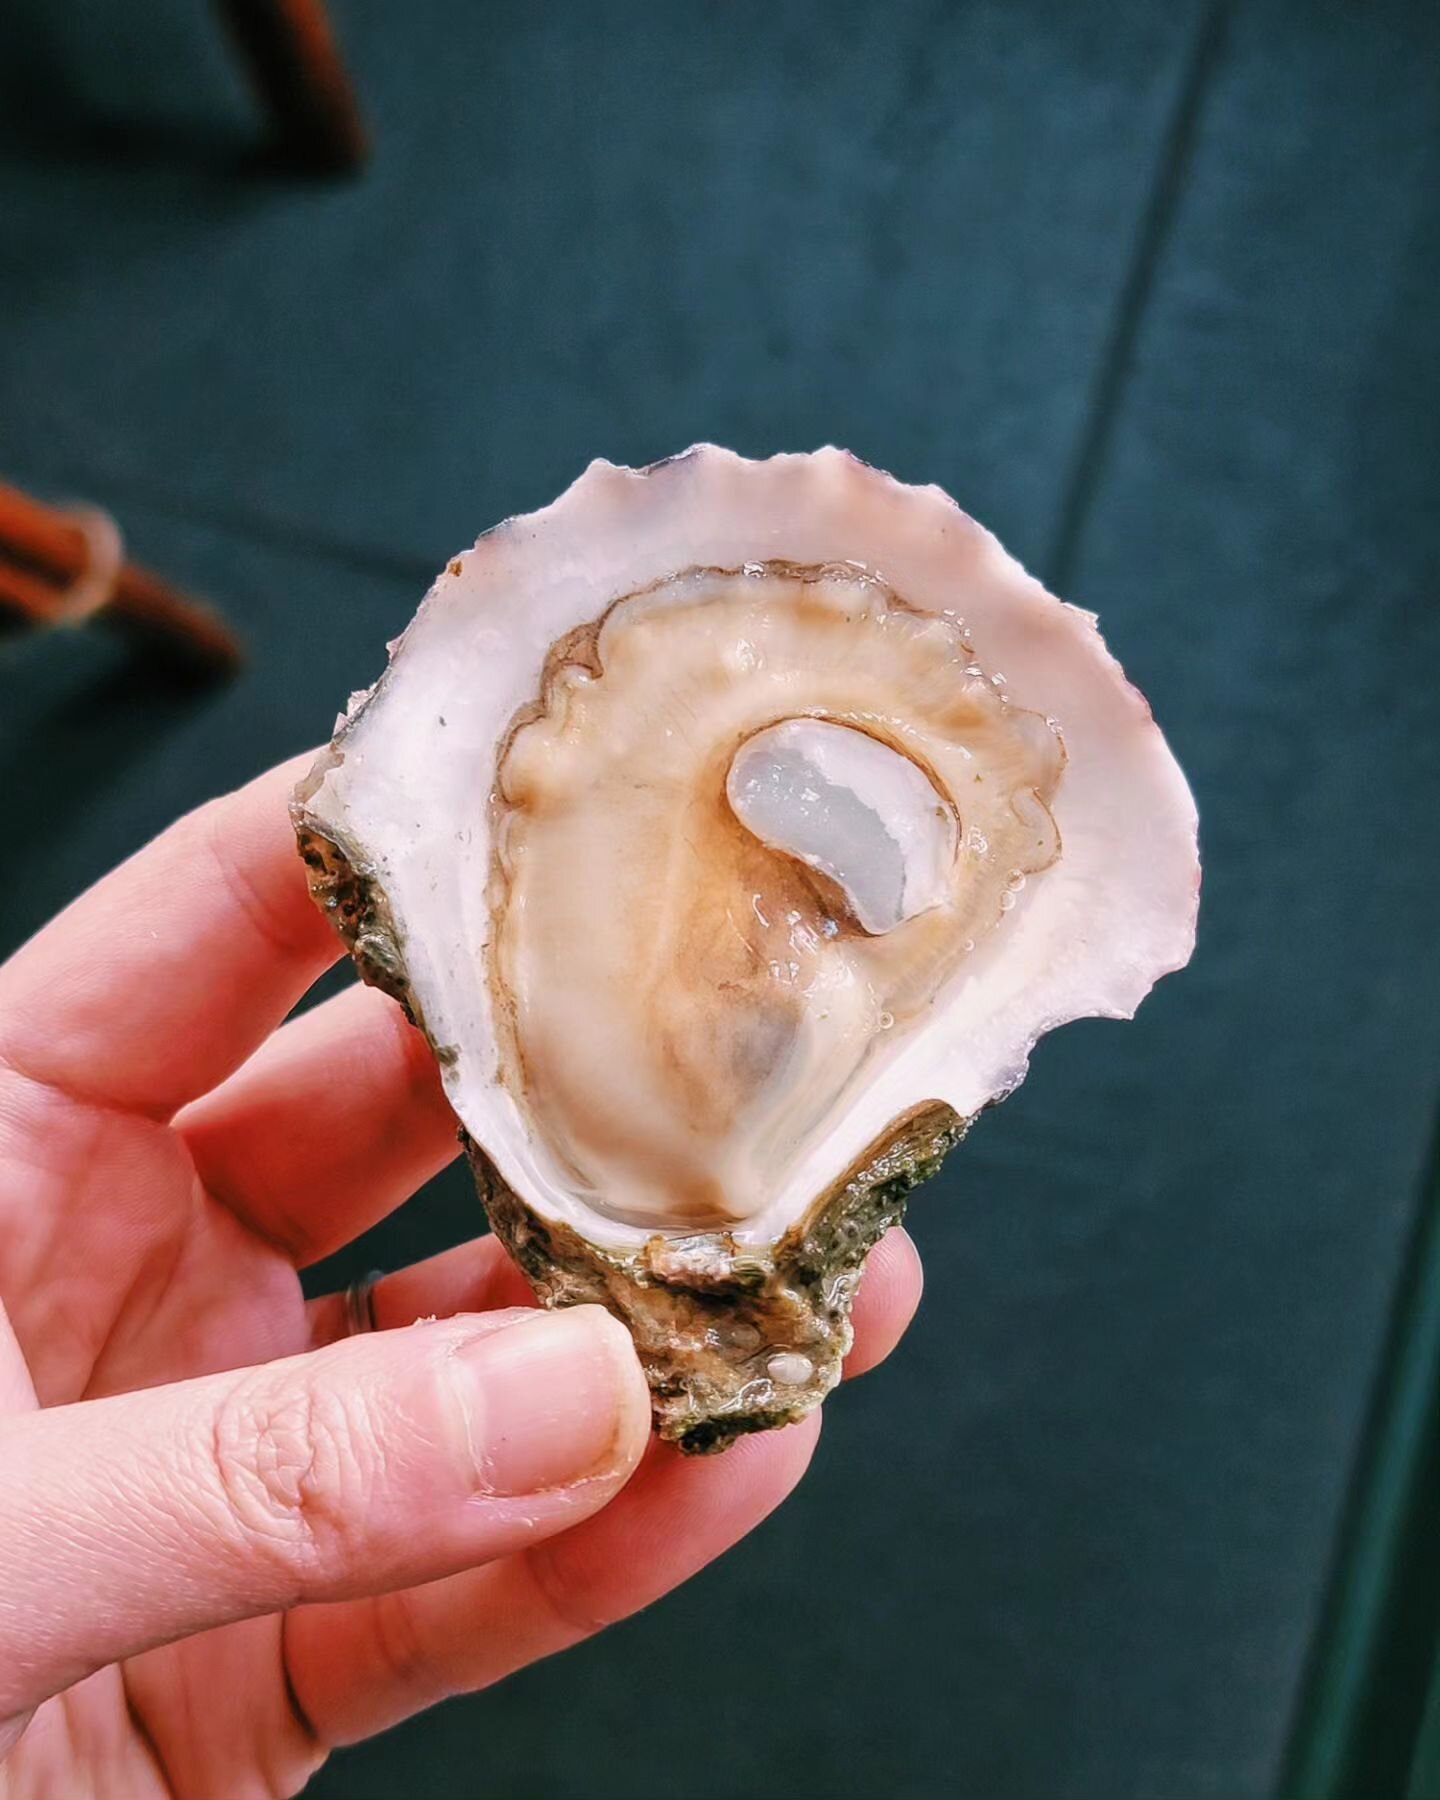 Area 10 Empire, Louisiana wild oyster: a soft and delicate brine (18 ppt), incredible bright and brothy umami, earthy undertone (yet not muddy), and mineral finish. Snappy texture. Adductor muscle 💪 but wasn't overly sweet. Haven't had one of these 